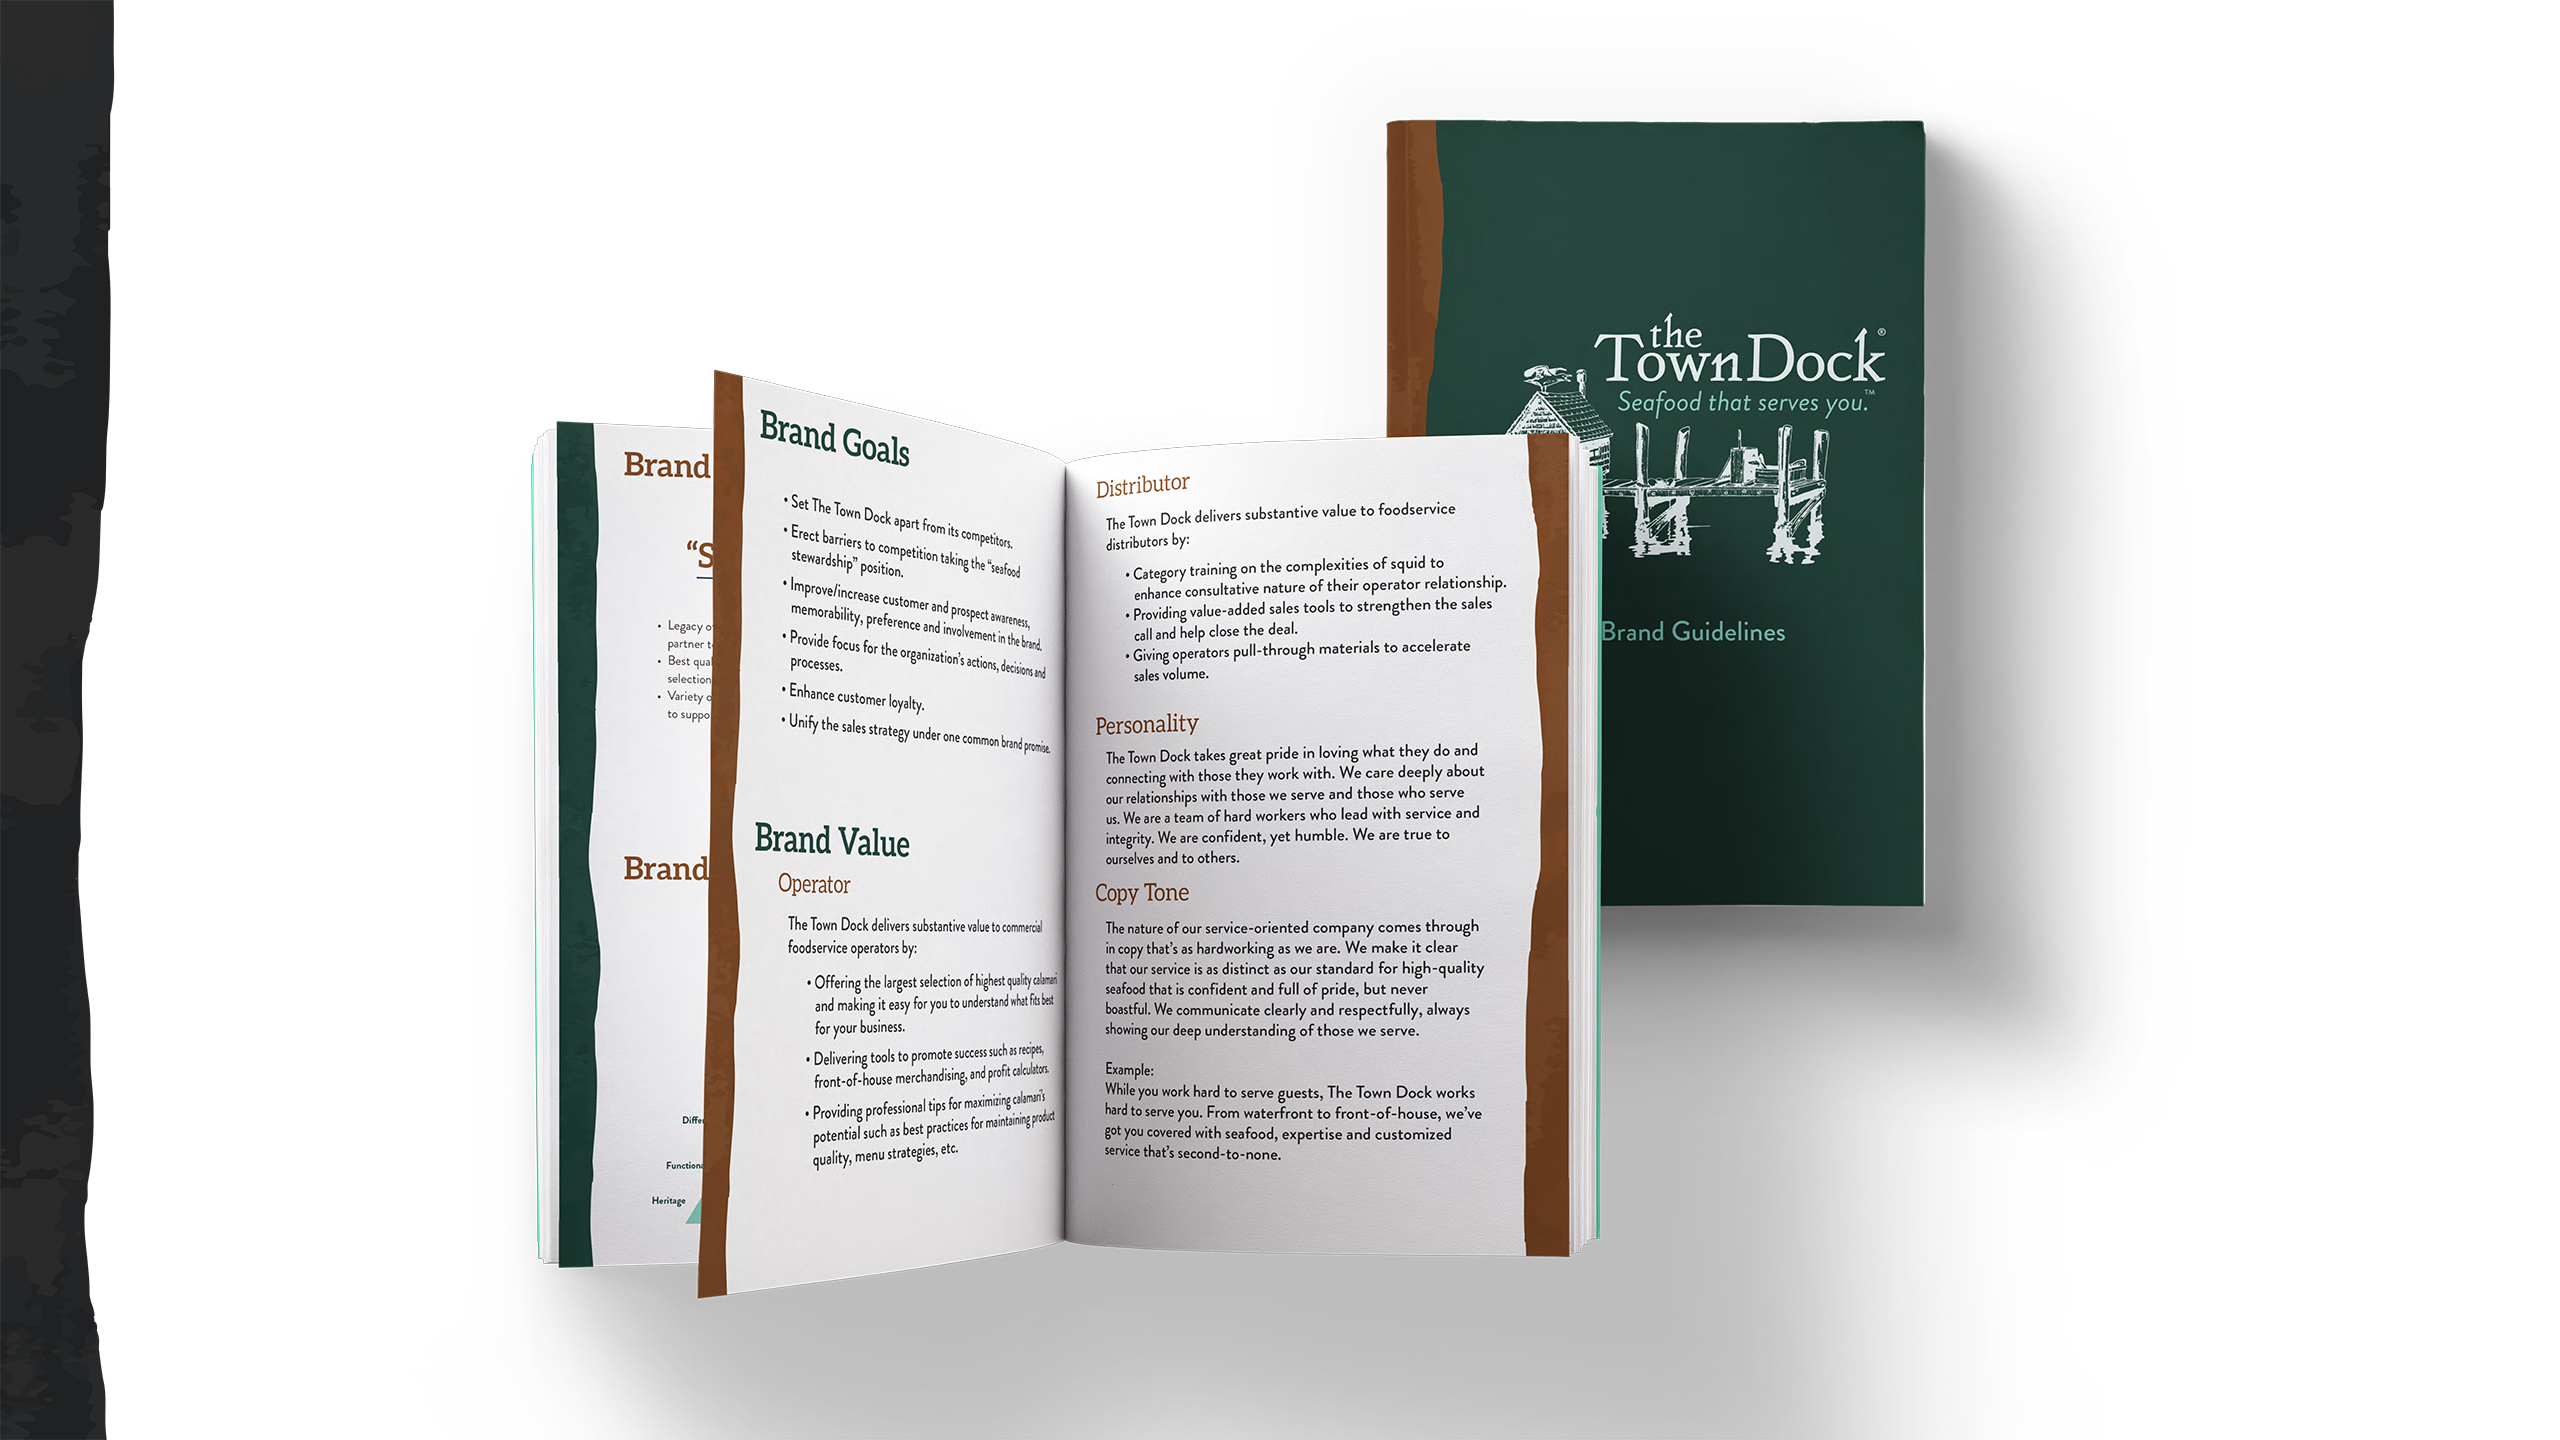 the Town Dock brand guidelines